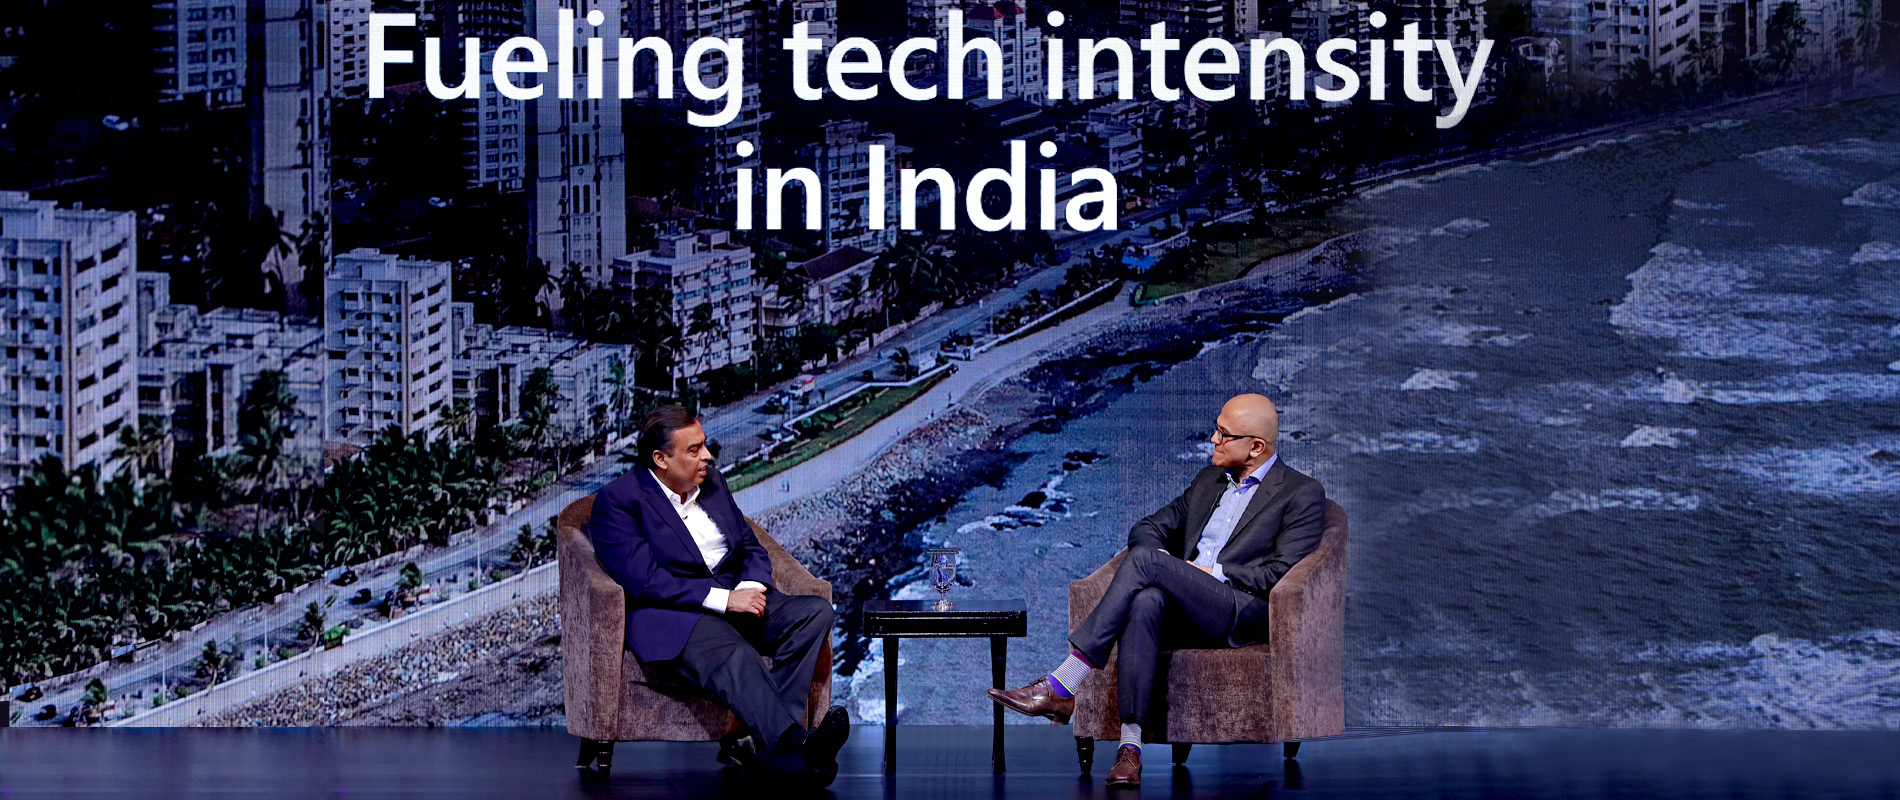 Microsoft CEO Satya Nadella and Reliance Industries Chairman and MD, Mukesh Ambani talk about how building tech intensity across organizations can benefit India’s economy and society. The two leaders exchanged their views on the topic at Microsoft Future Decoded: CEO Summit in Mumbai today